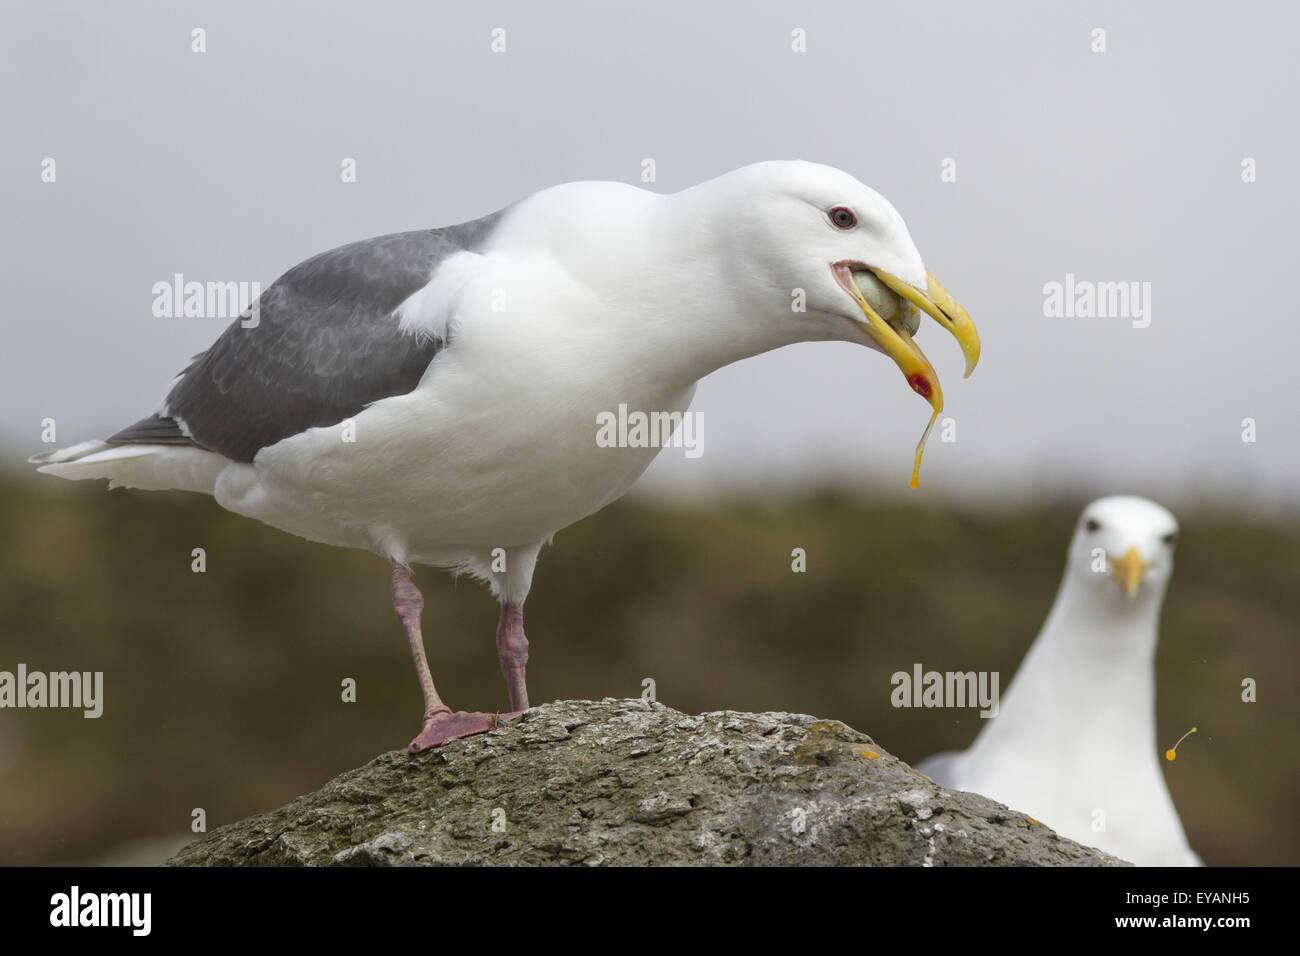 glaucous-winged gull with an egg cormorant  in its beak Stock Photo